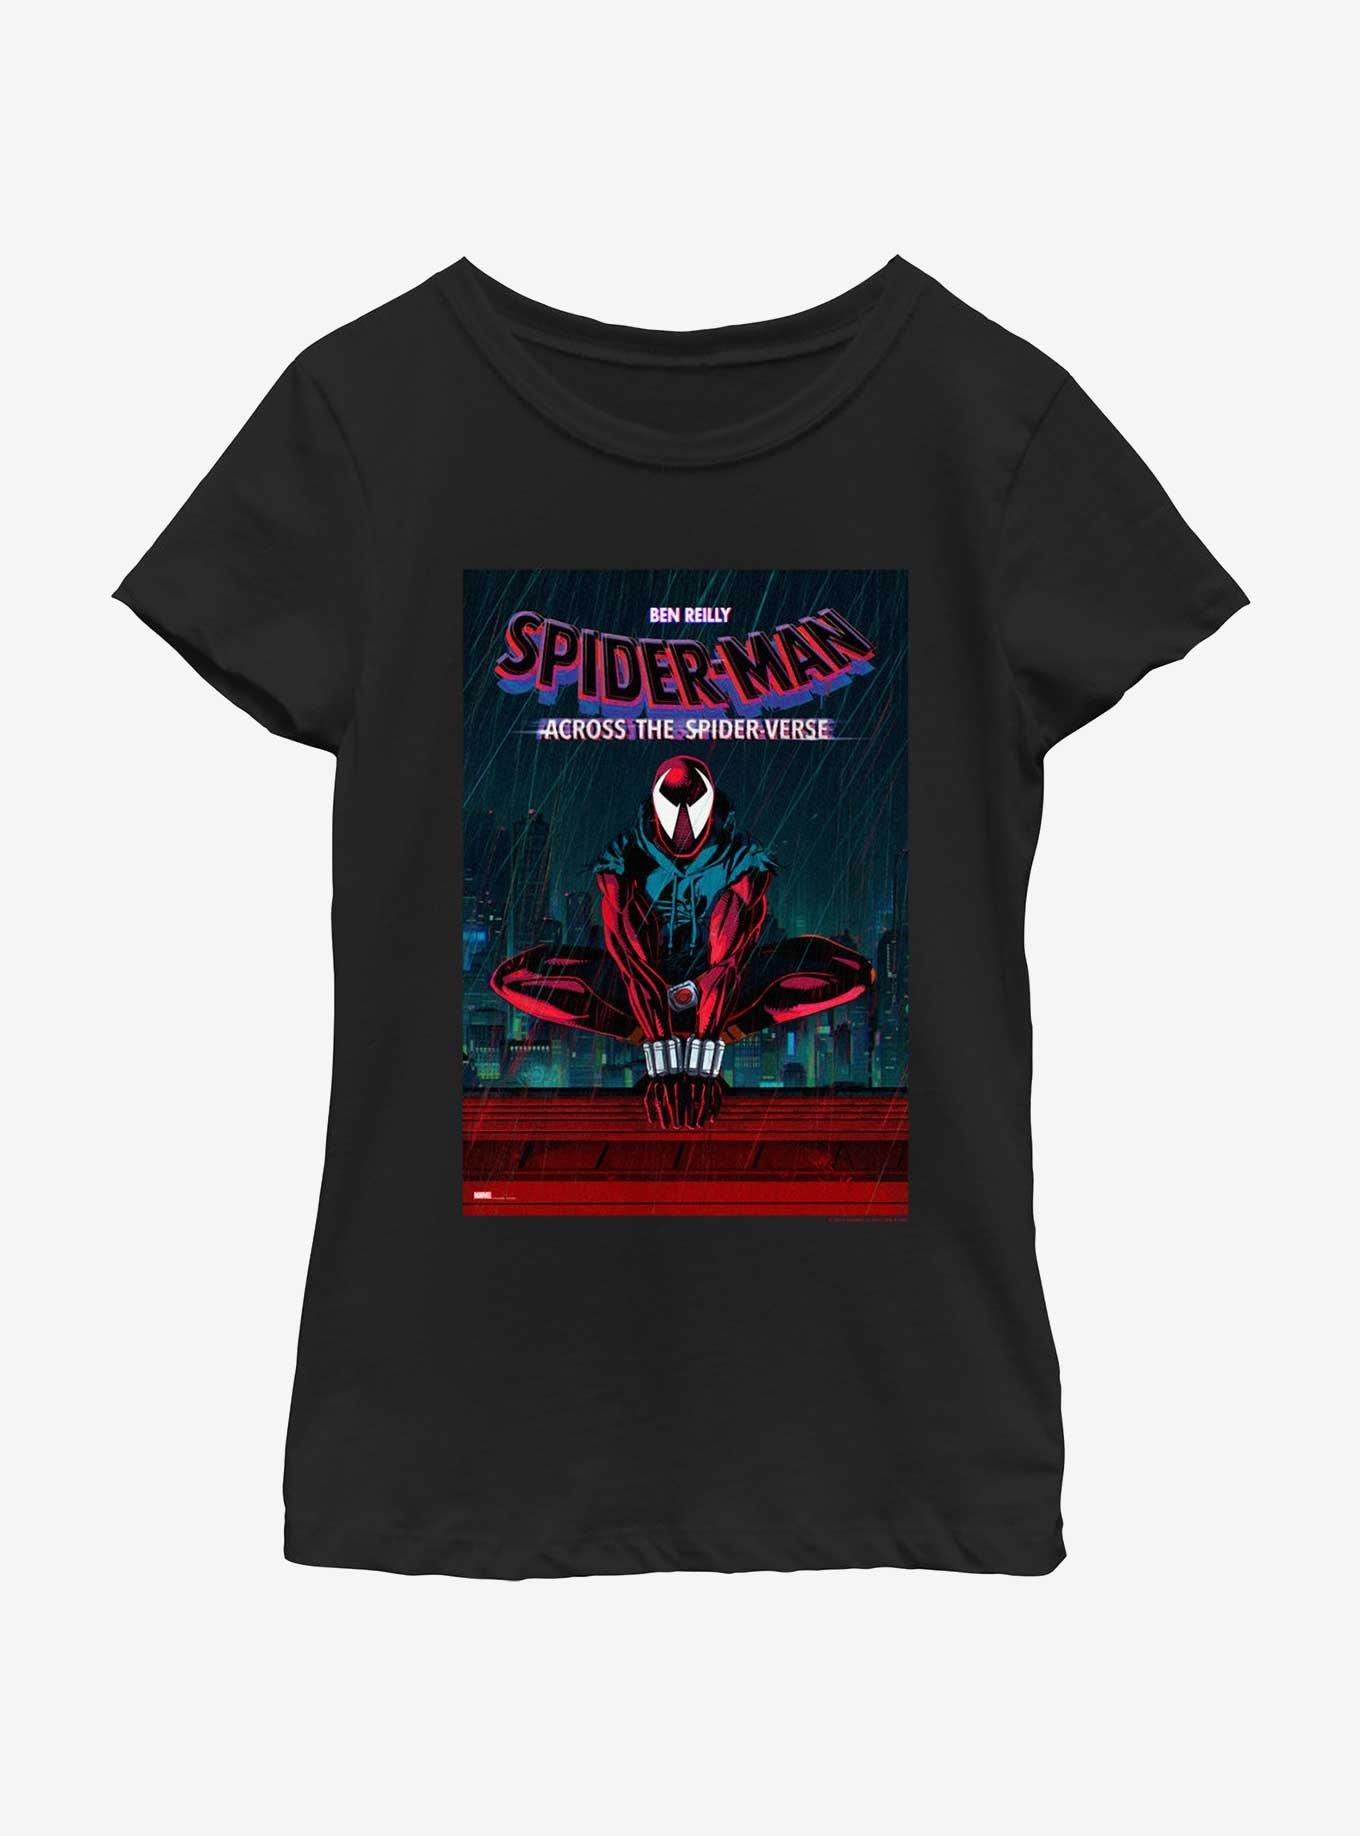 Spider-Man: Across The Spider-Verse Scarlet-Spider Poster Youth Girls T-Shirt, BLACK, hi-res